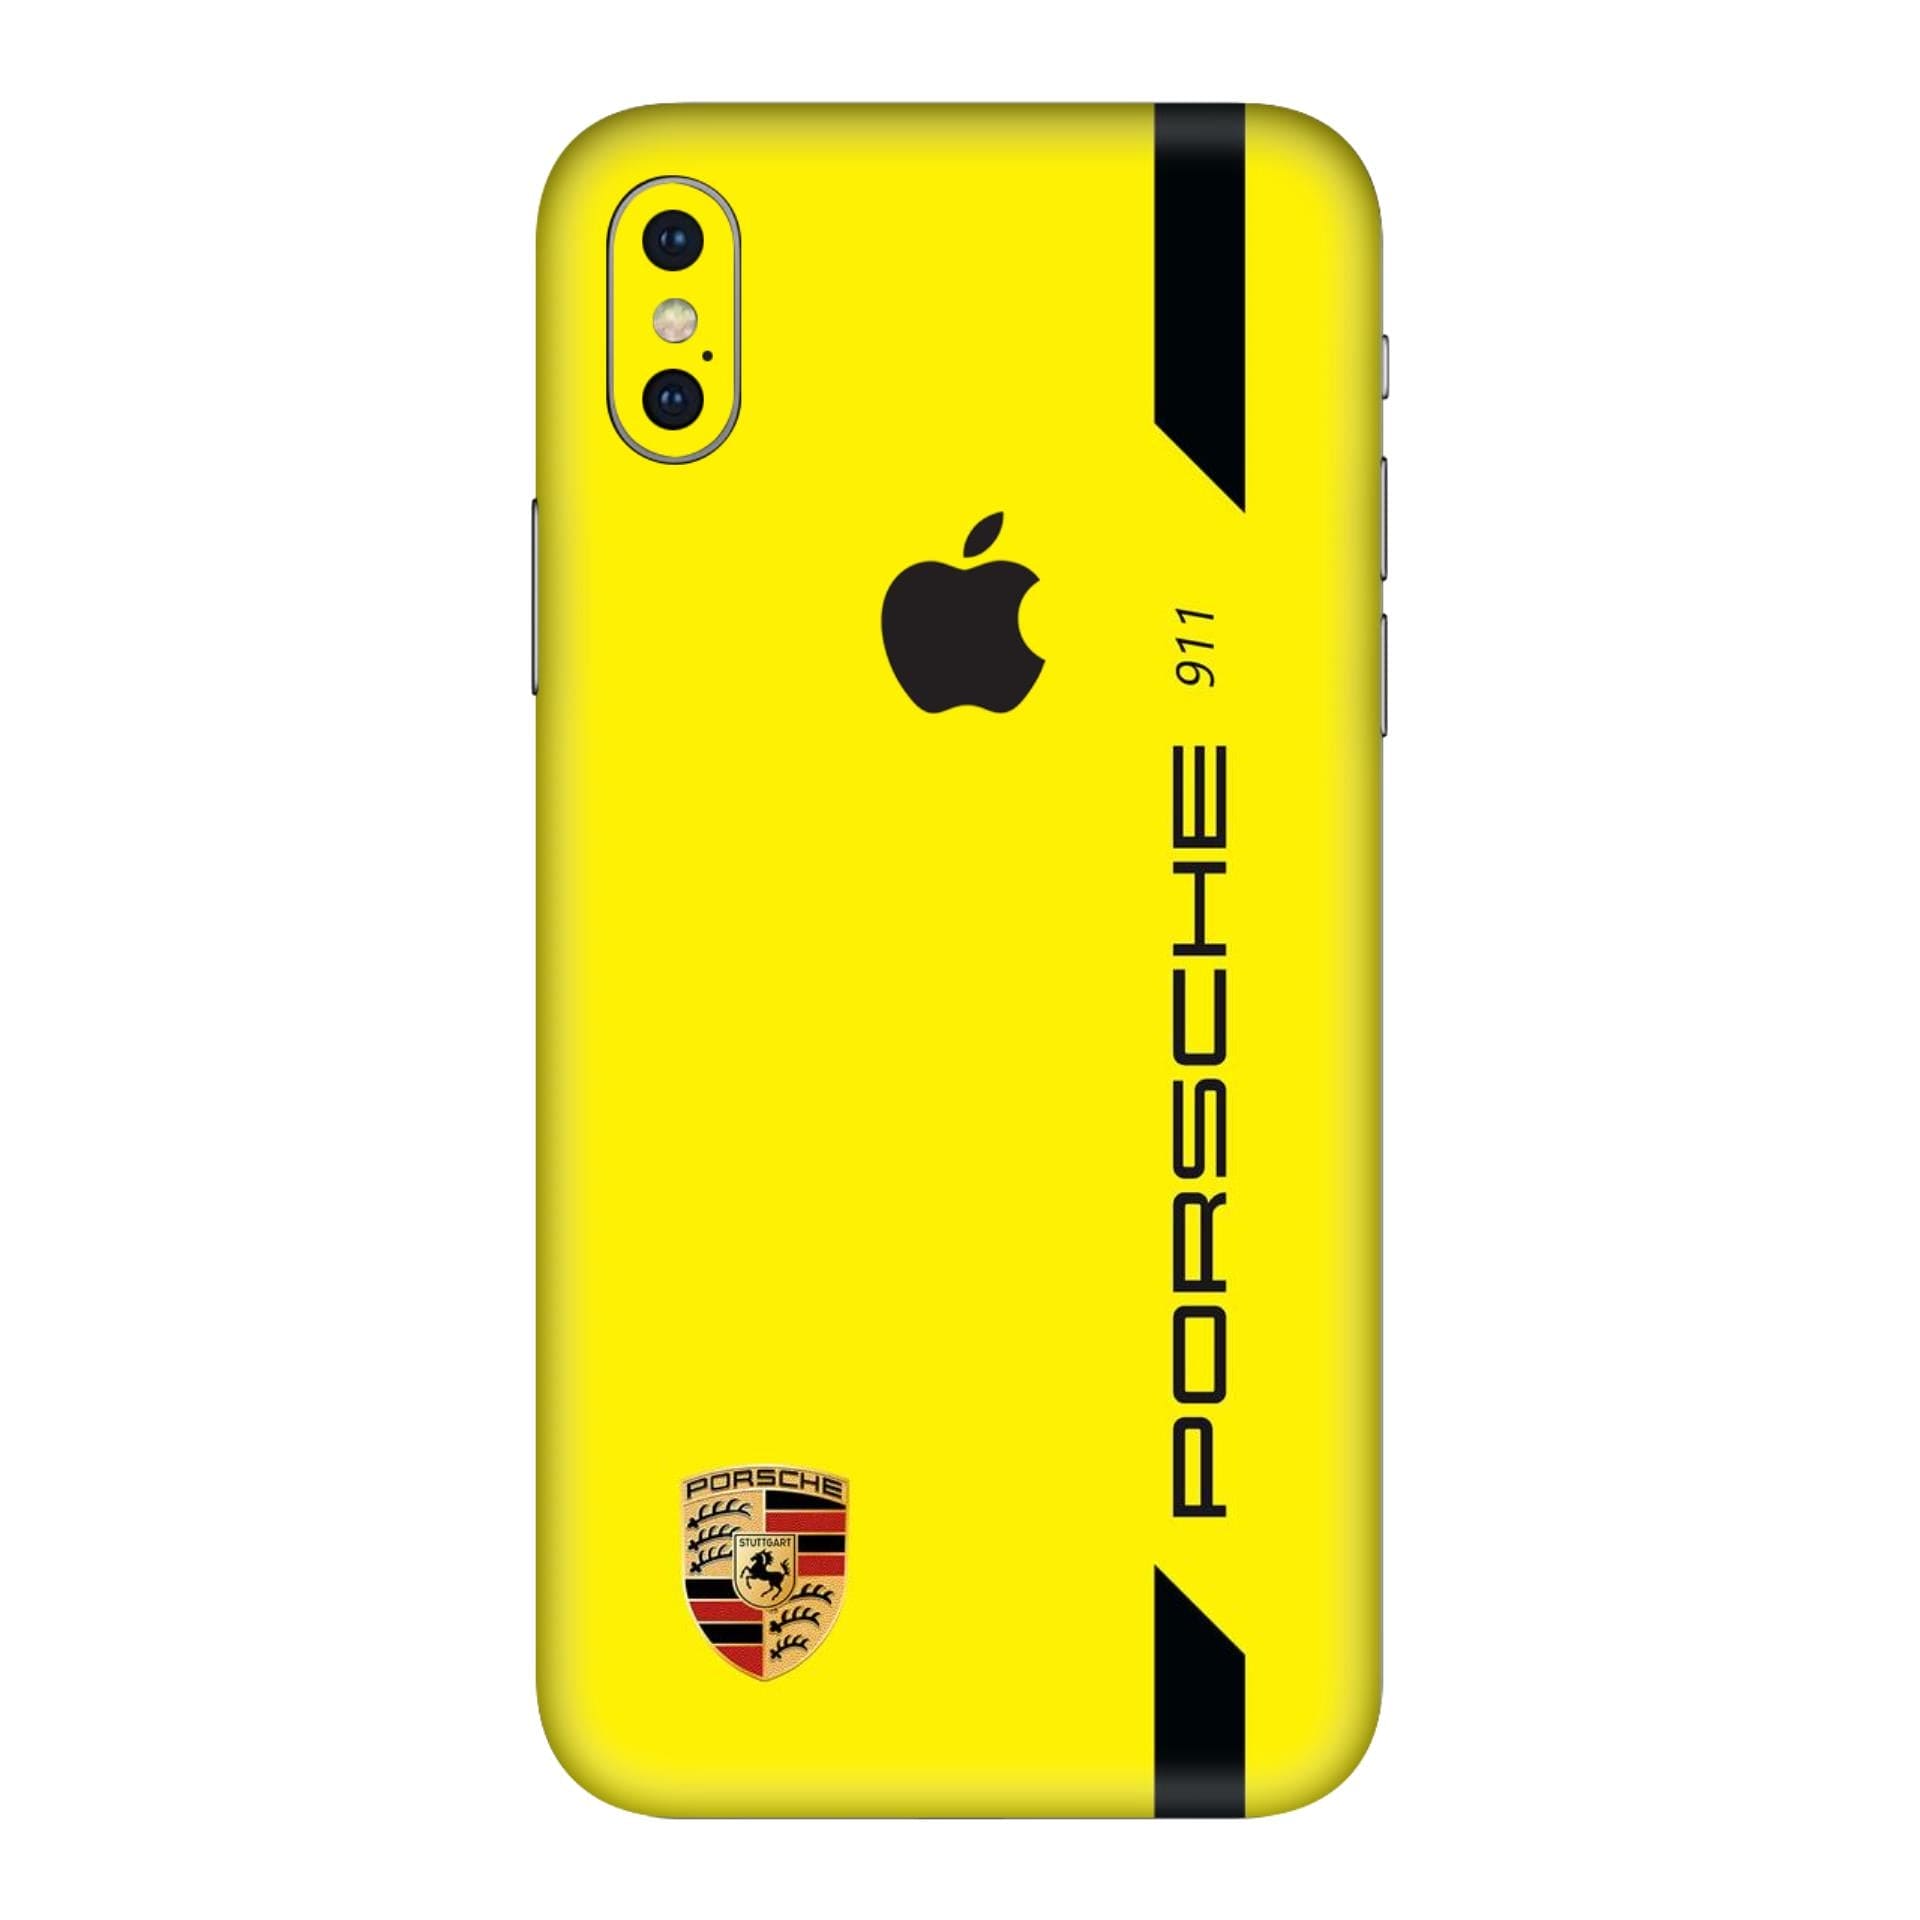 iphone XS Max Porsched skins